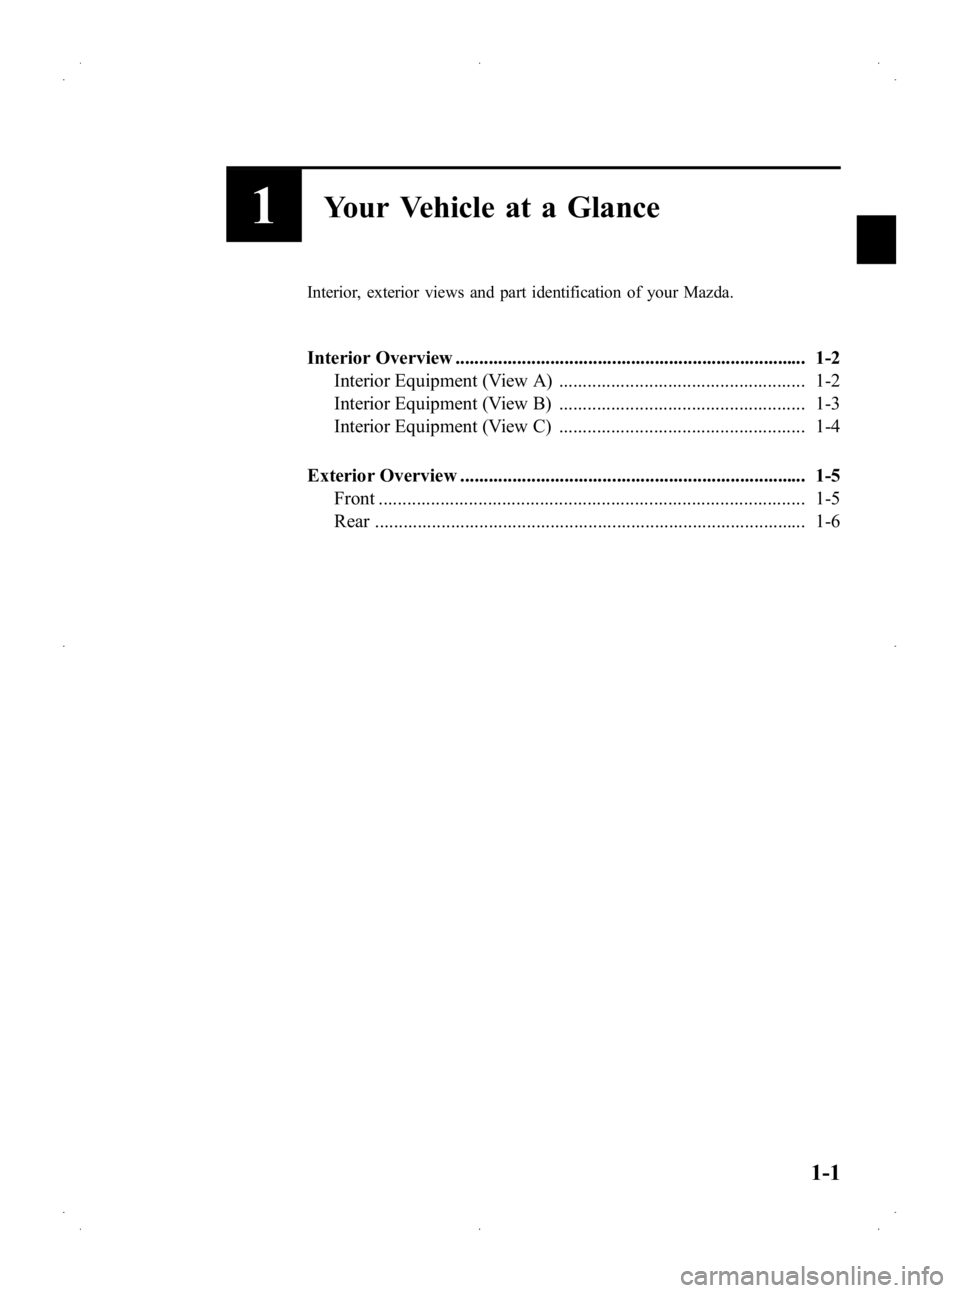 MAZDA MODEL 2 2013  Owners Manual Black plate (7,1)
1Your Vehicle at a Glance
Interior, exterior views and part identification of your Mazda.
Interior Overview ..........................................................................